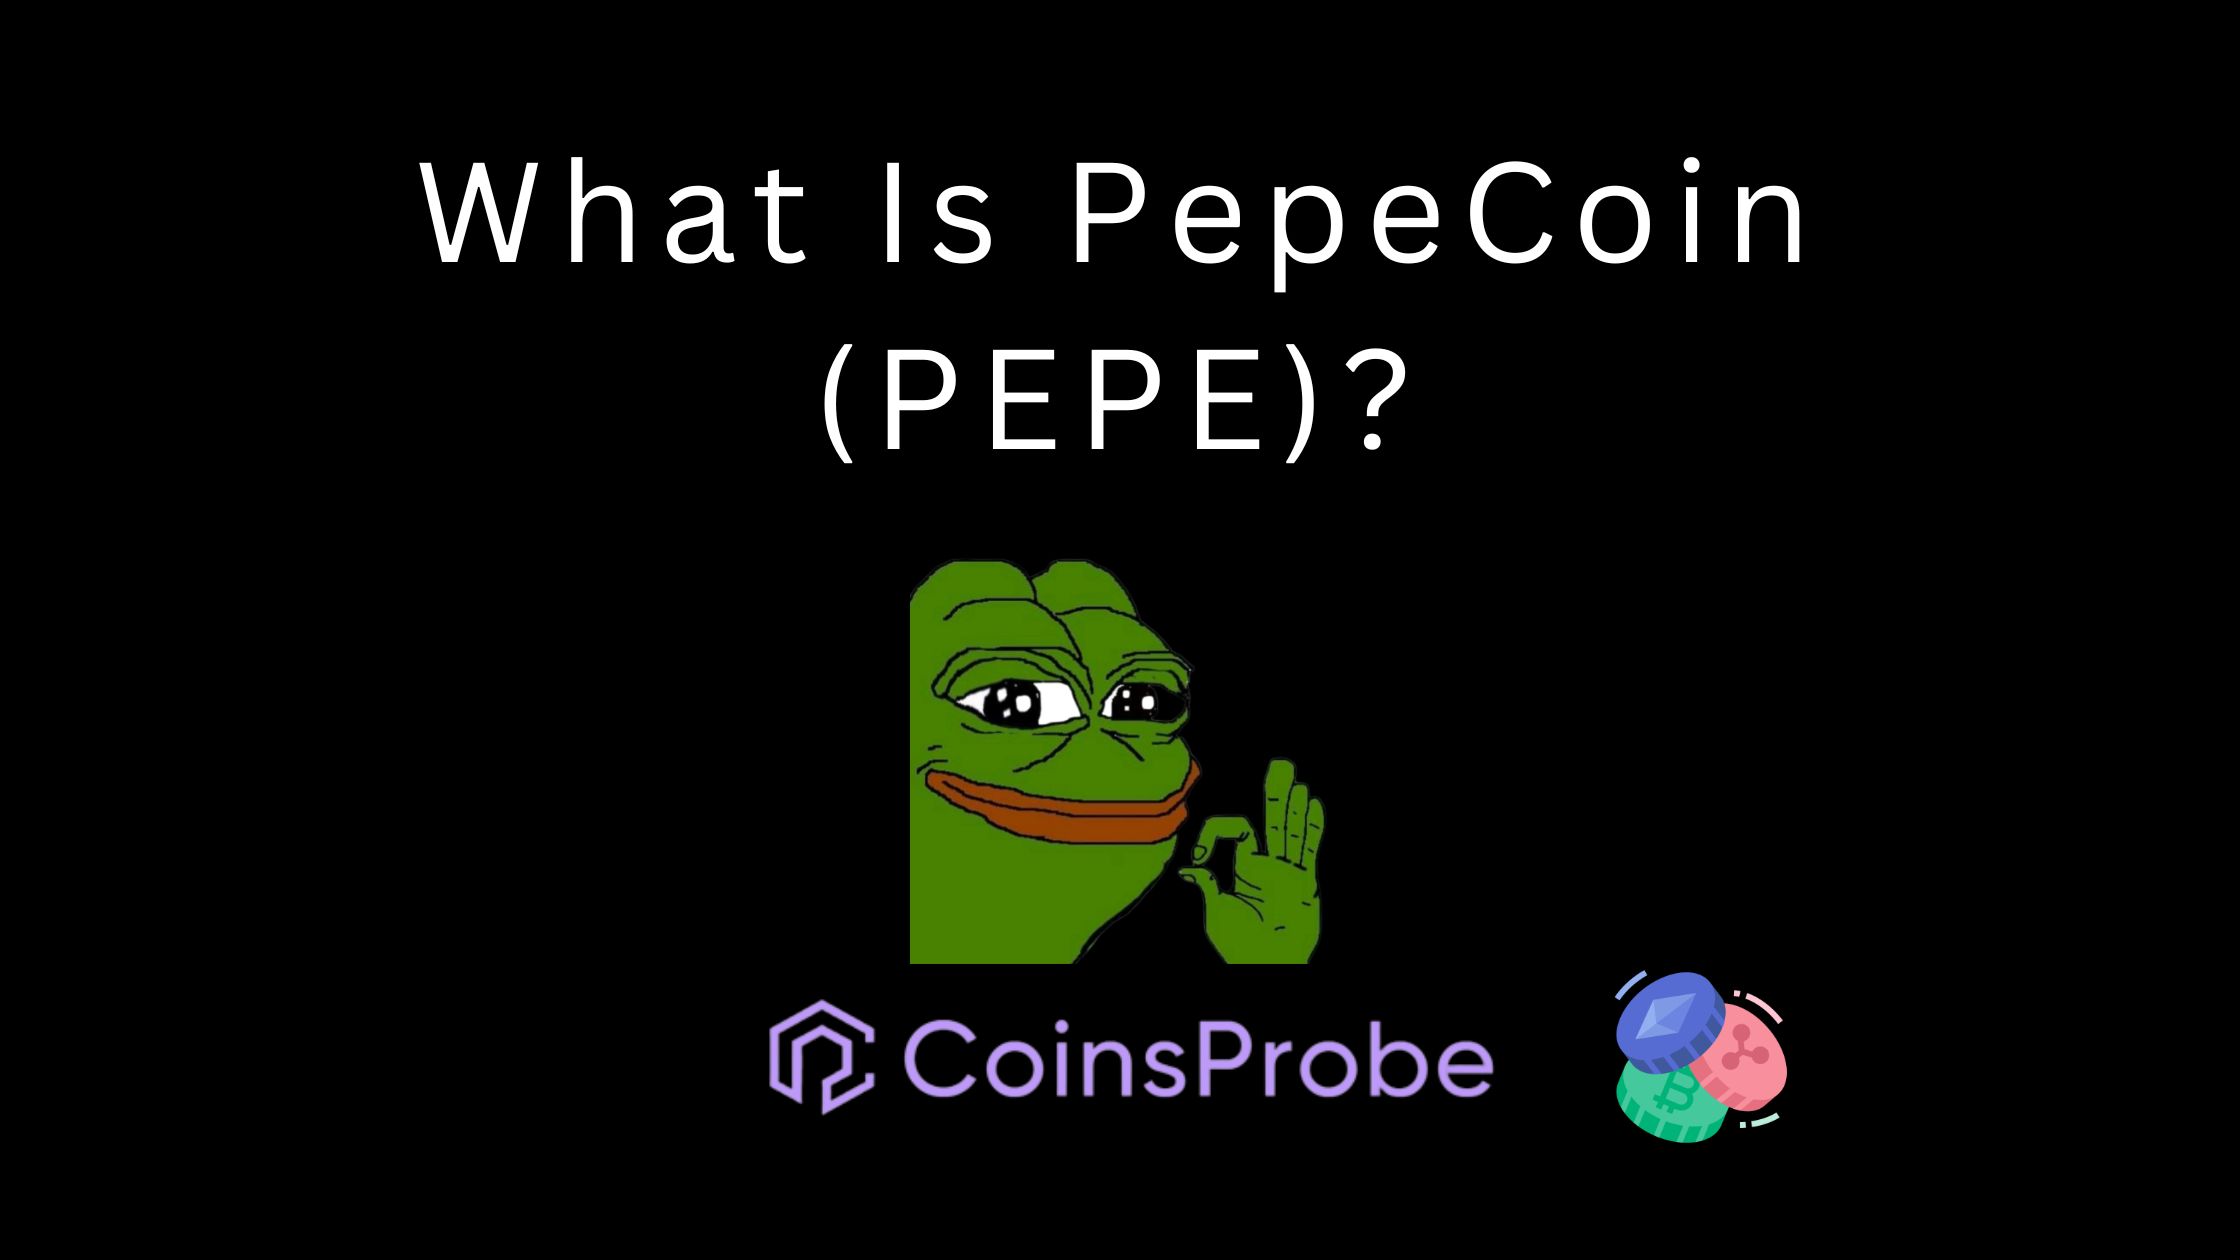 What Is PepeCoin (PEPE)?